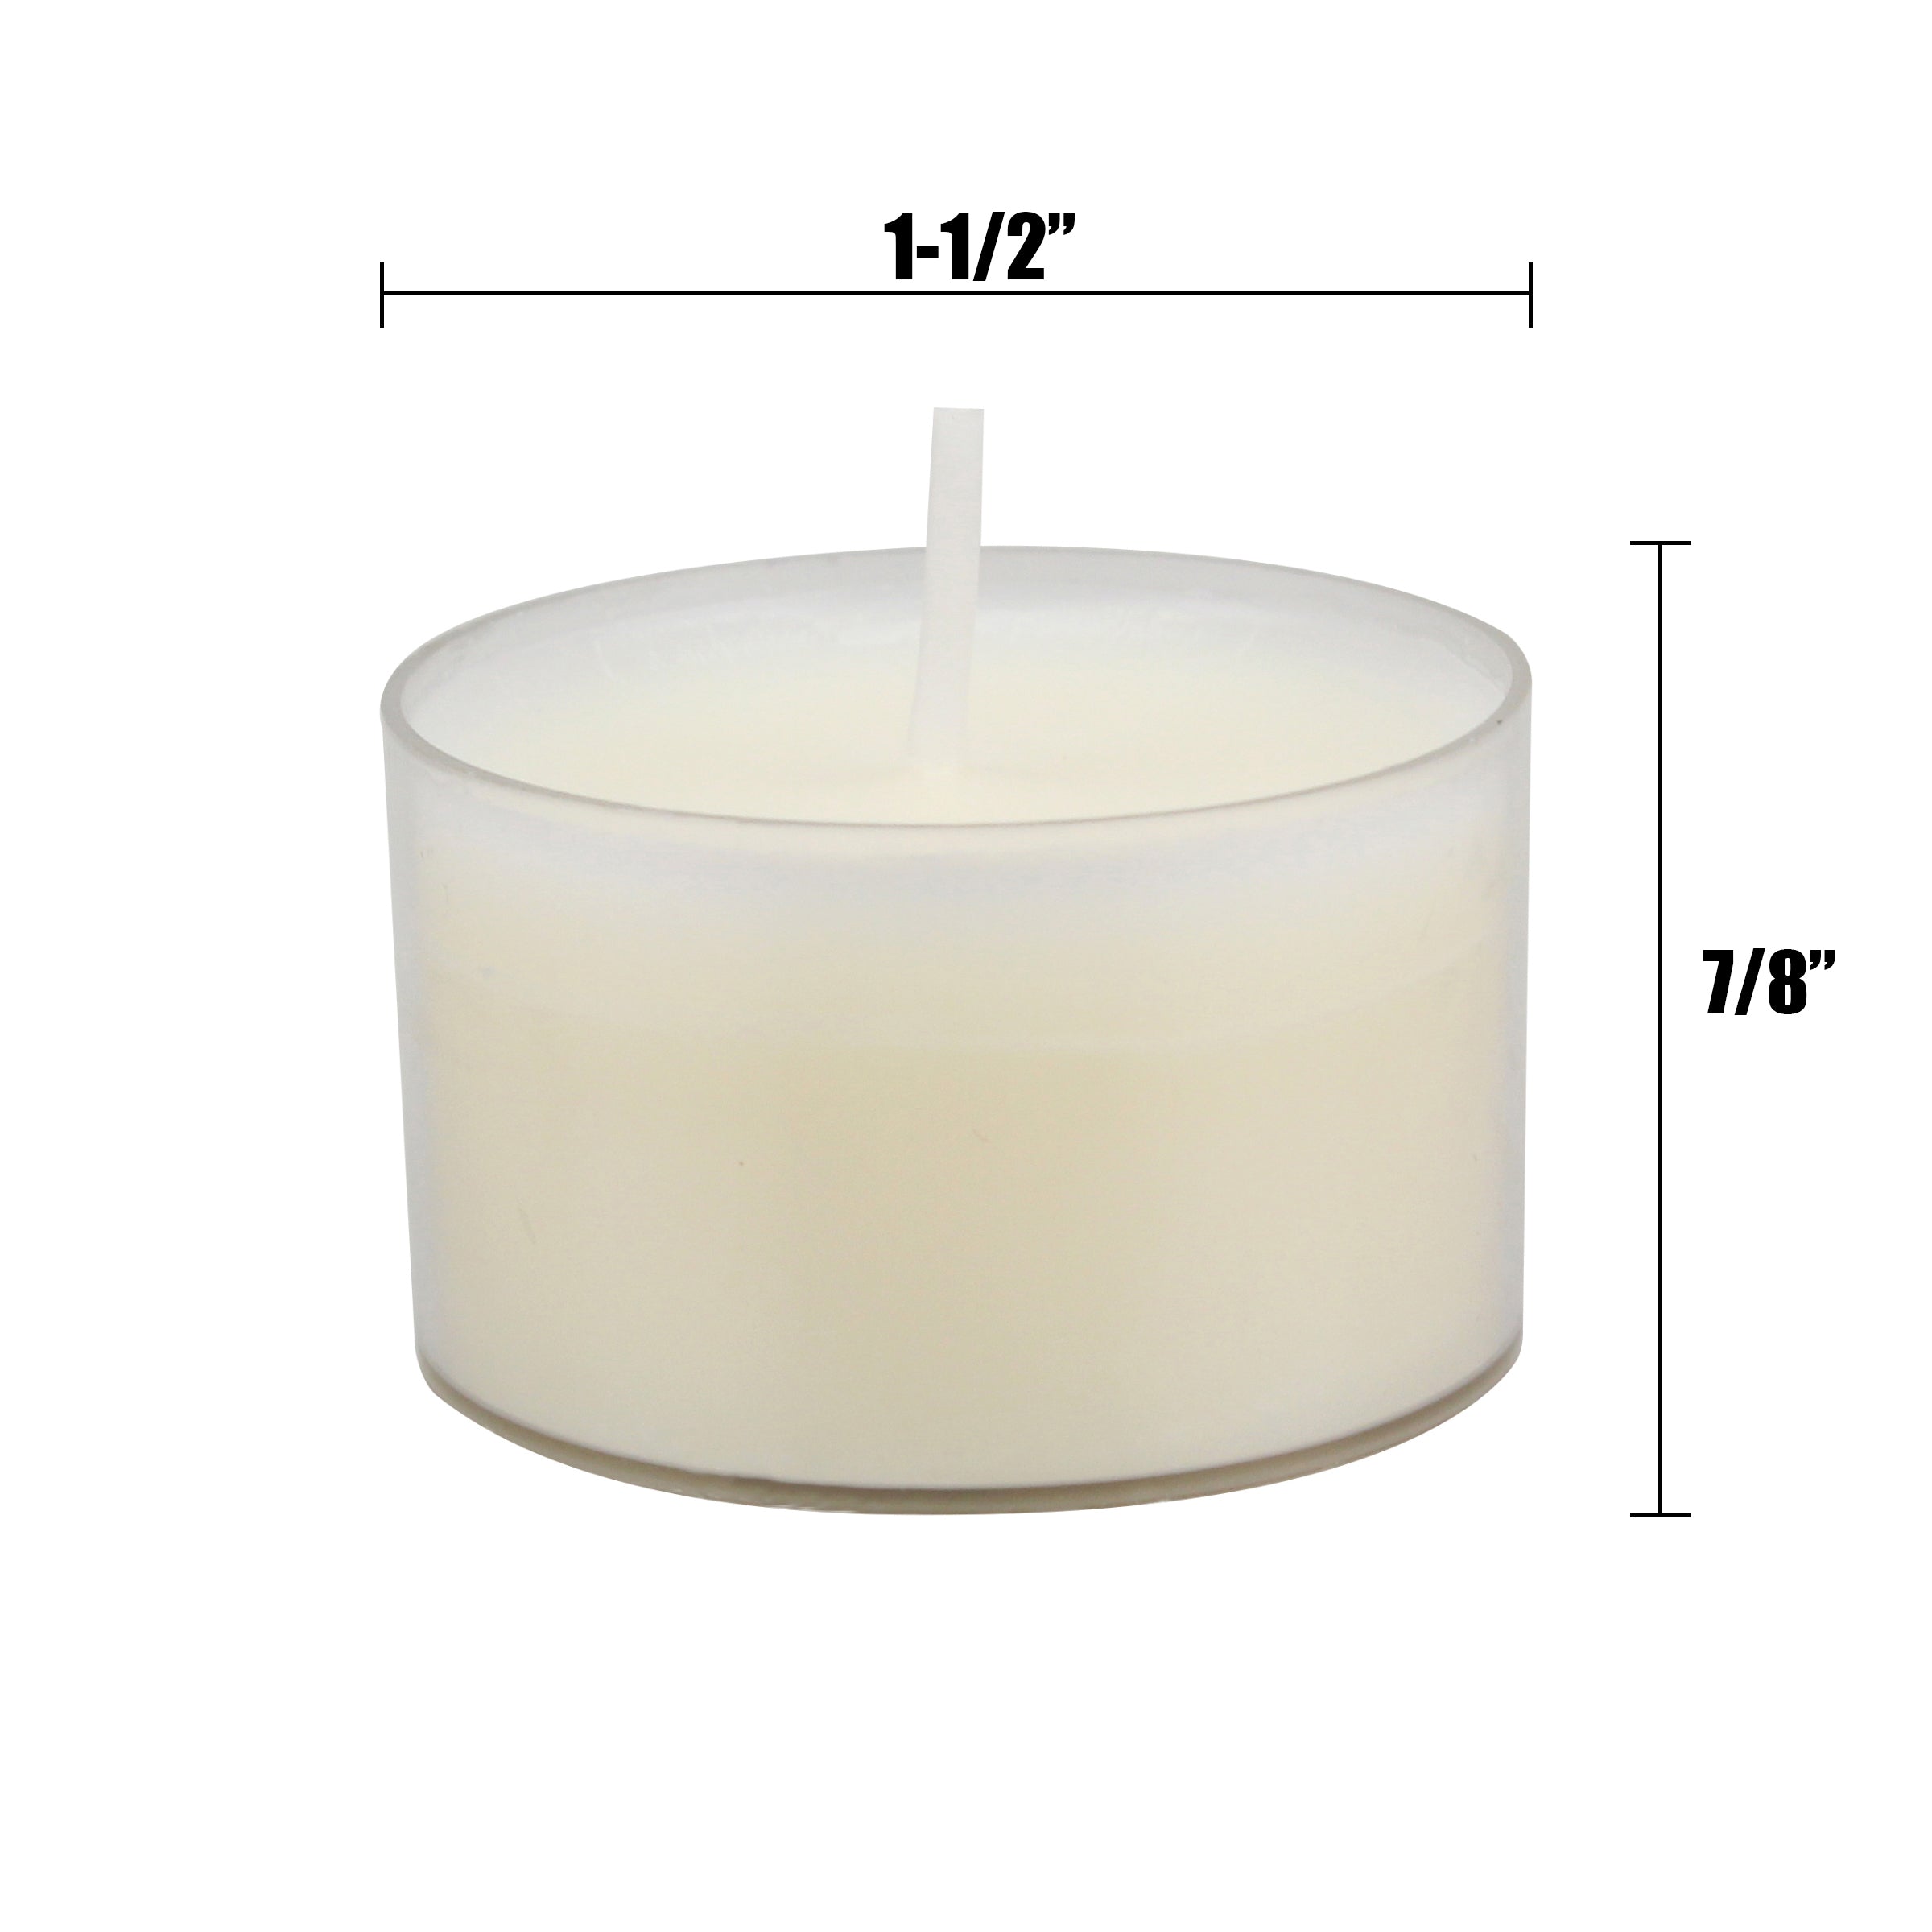 General Wax & Candle  8-HOUR UNSCENTED VOTIVE CANDLE (Bulk